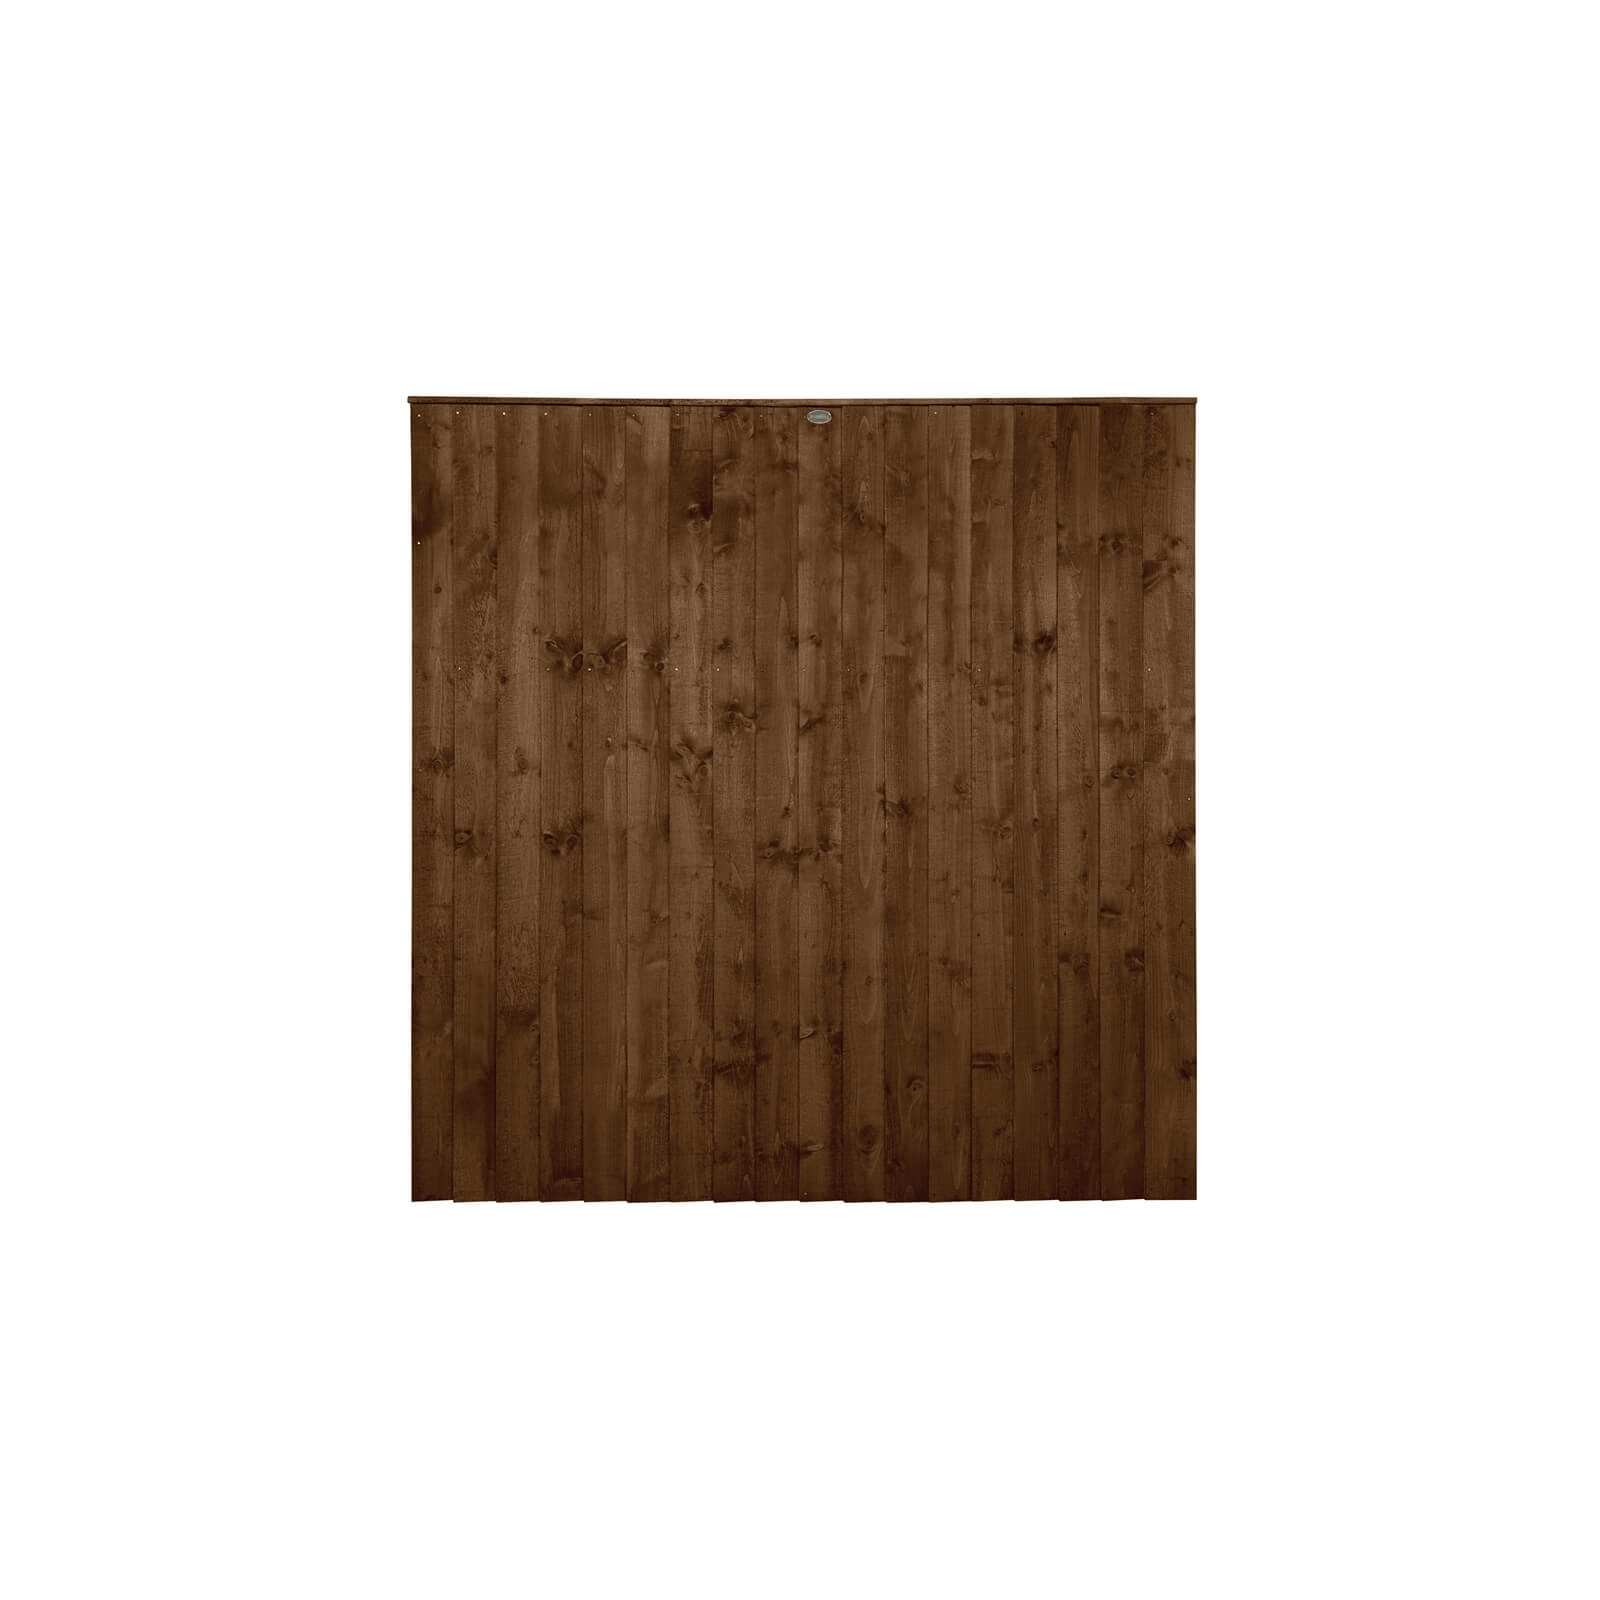 6ft x 6ft (1.83m x 1.85m) Pressure Treated Featheredge Fence Panel (Dark Brown) - Pack of 20